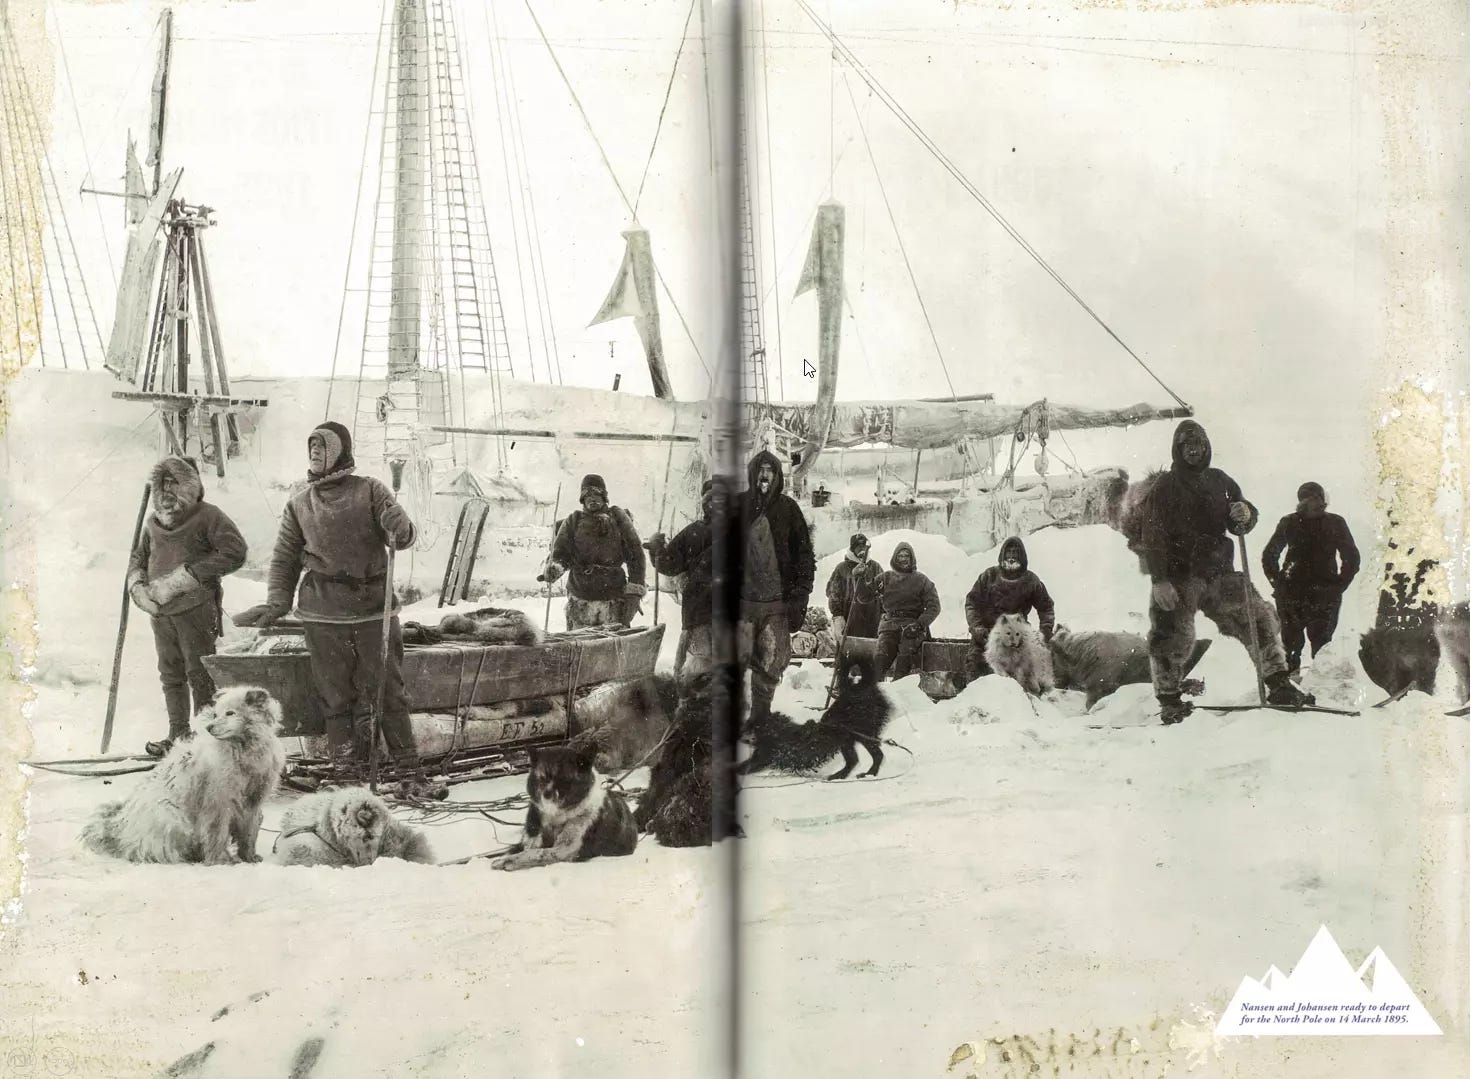 Nansen and Johansen depart to ski towards the North Pole, 14th of March 1895